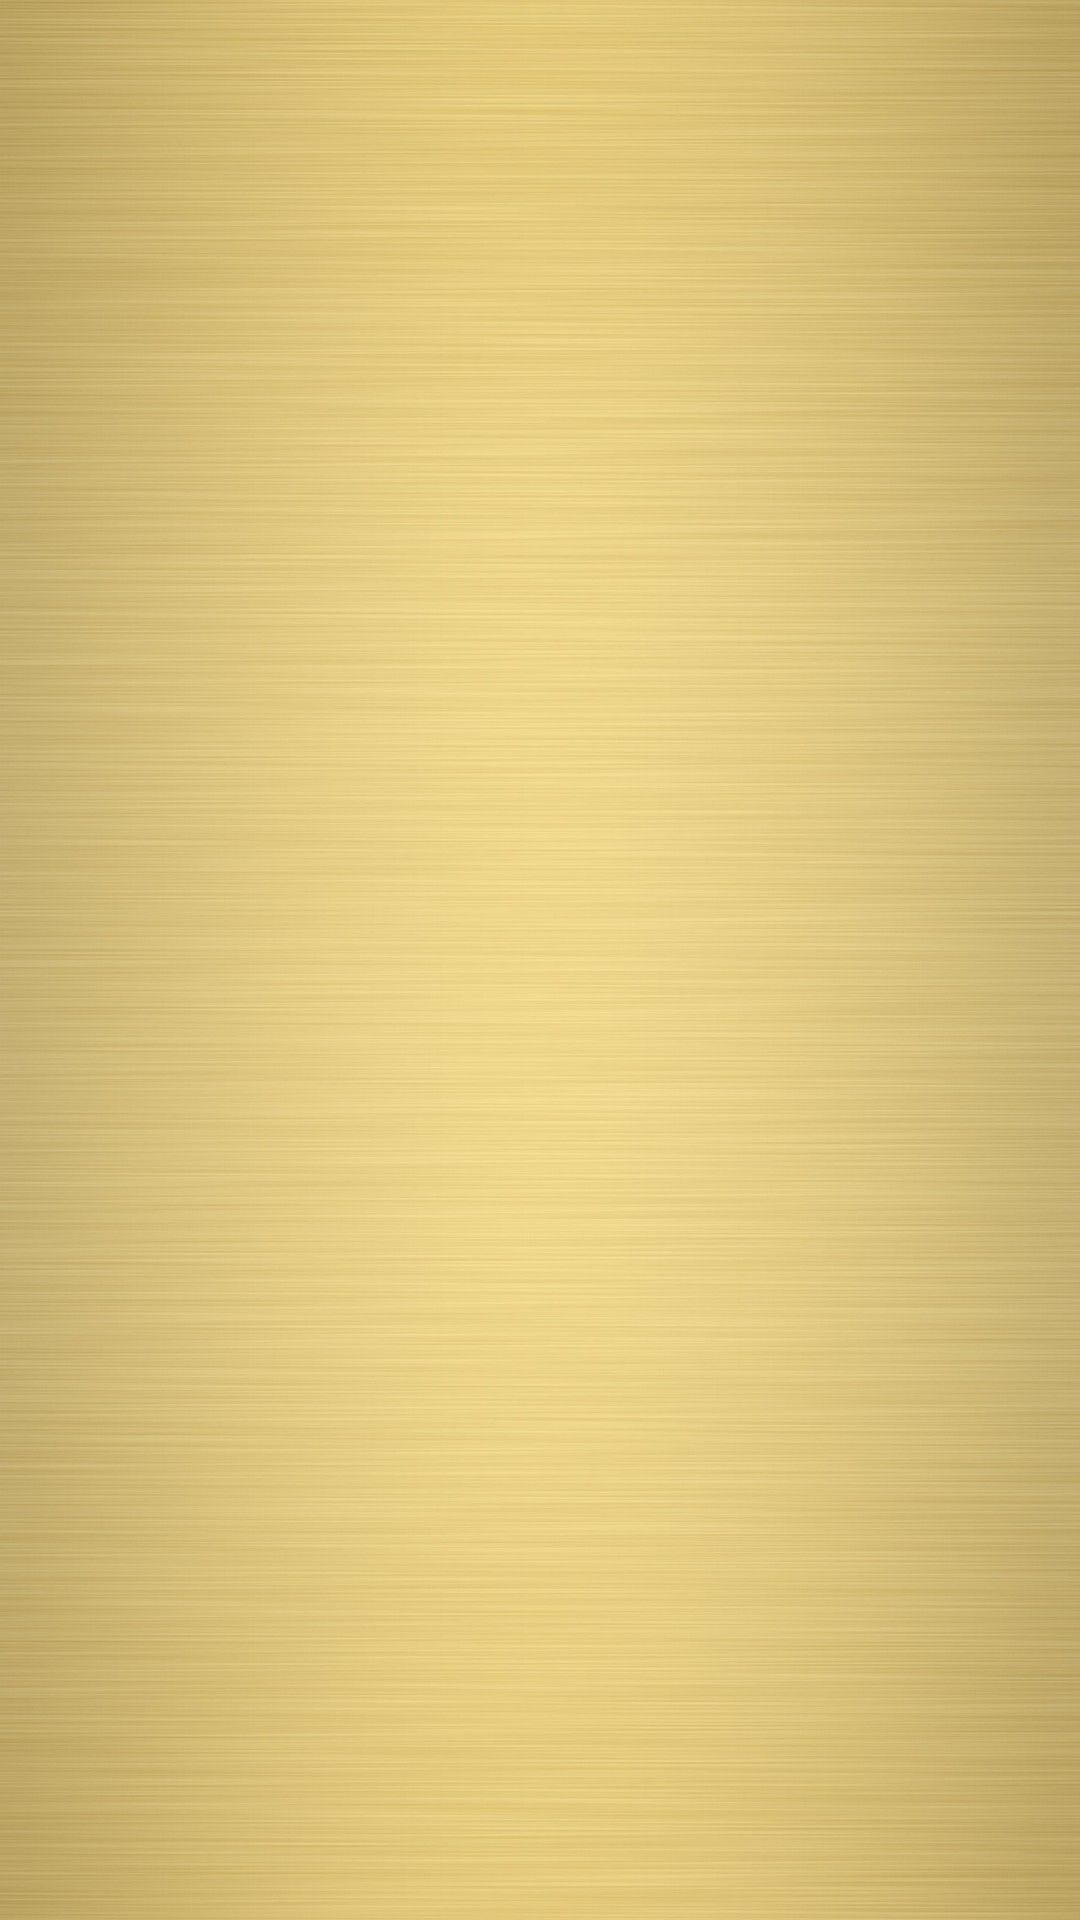 Plain Gold Android Wallpaper Android Wallpaper